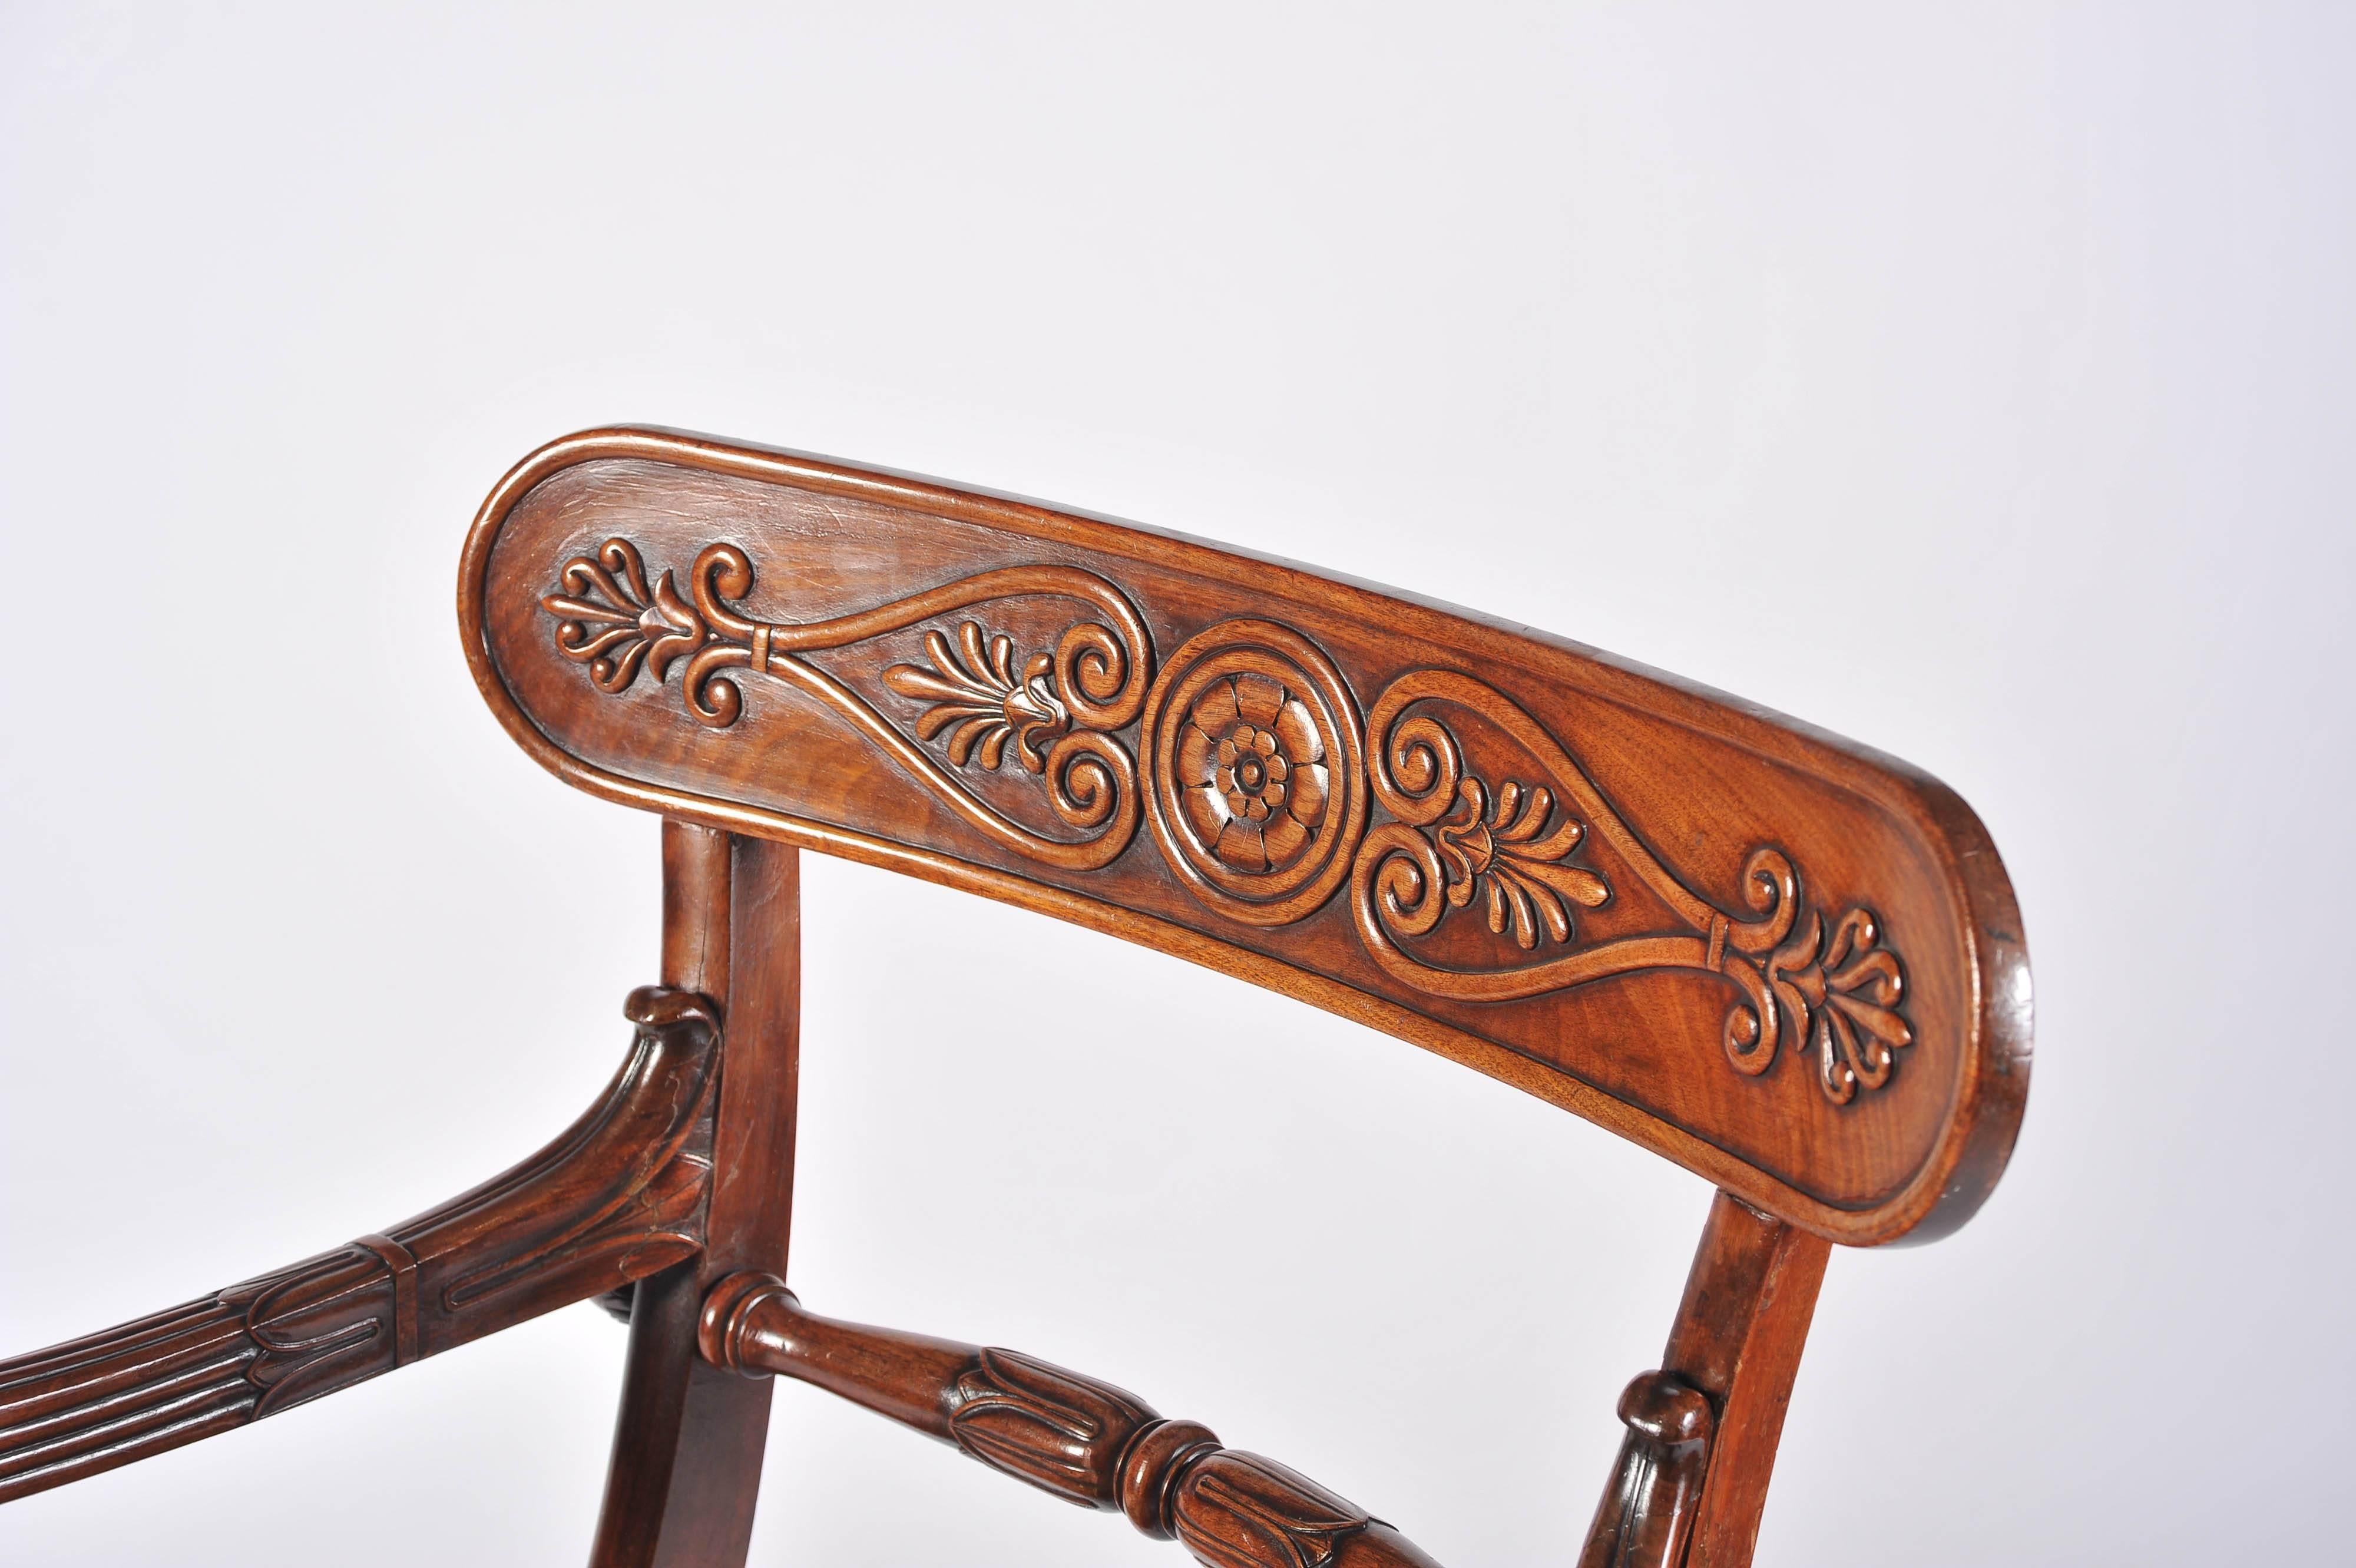 Mahogany Desk Chair, French Empire Period, Cabriole Legs, Early 19th Century For Sale 3